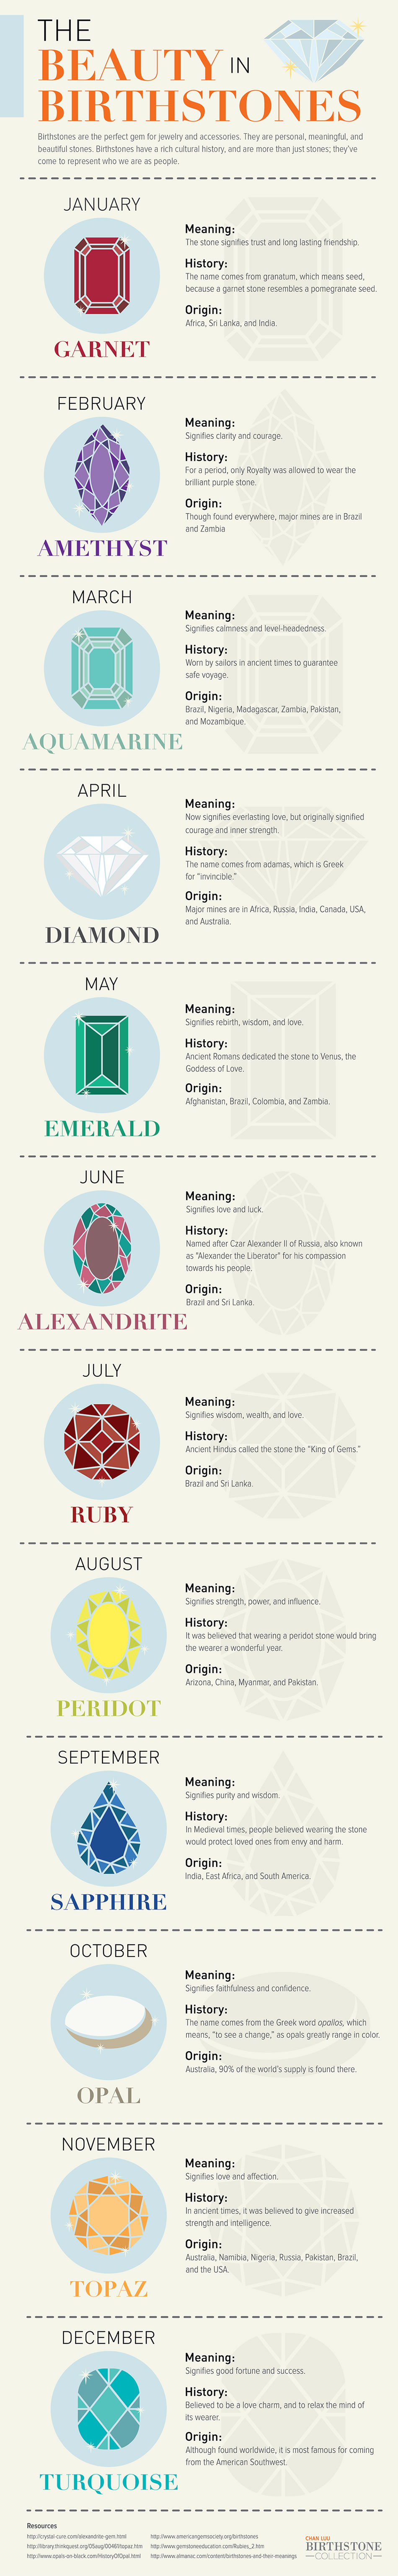 The Beauty in Birthstones